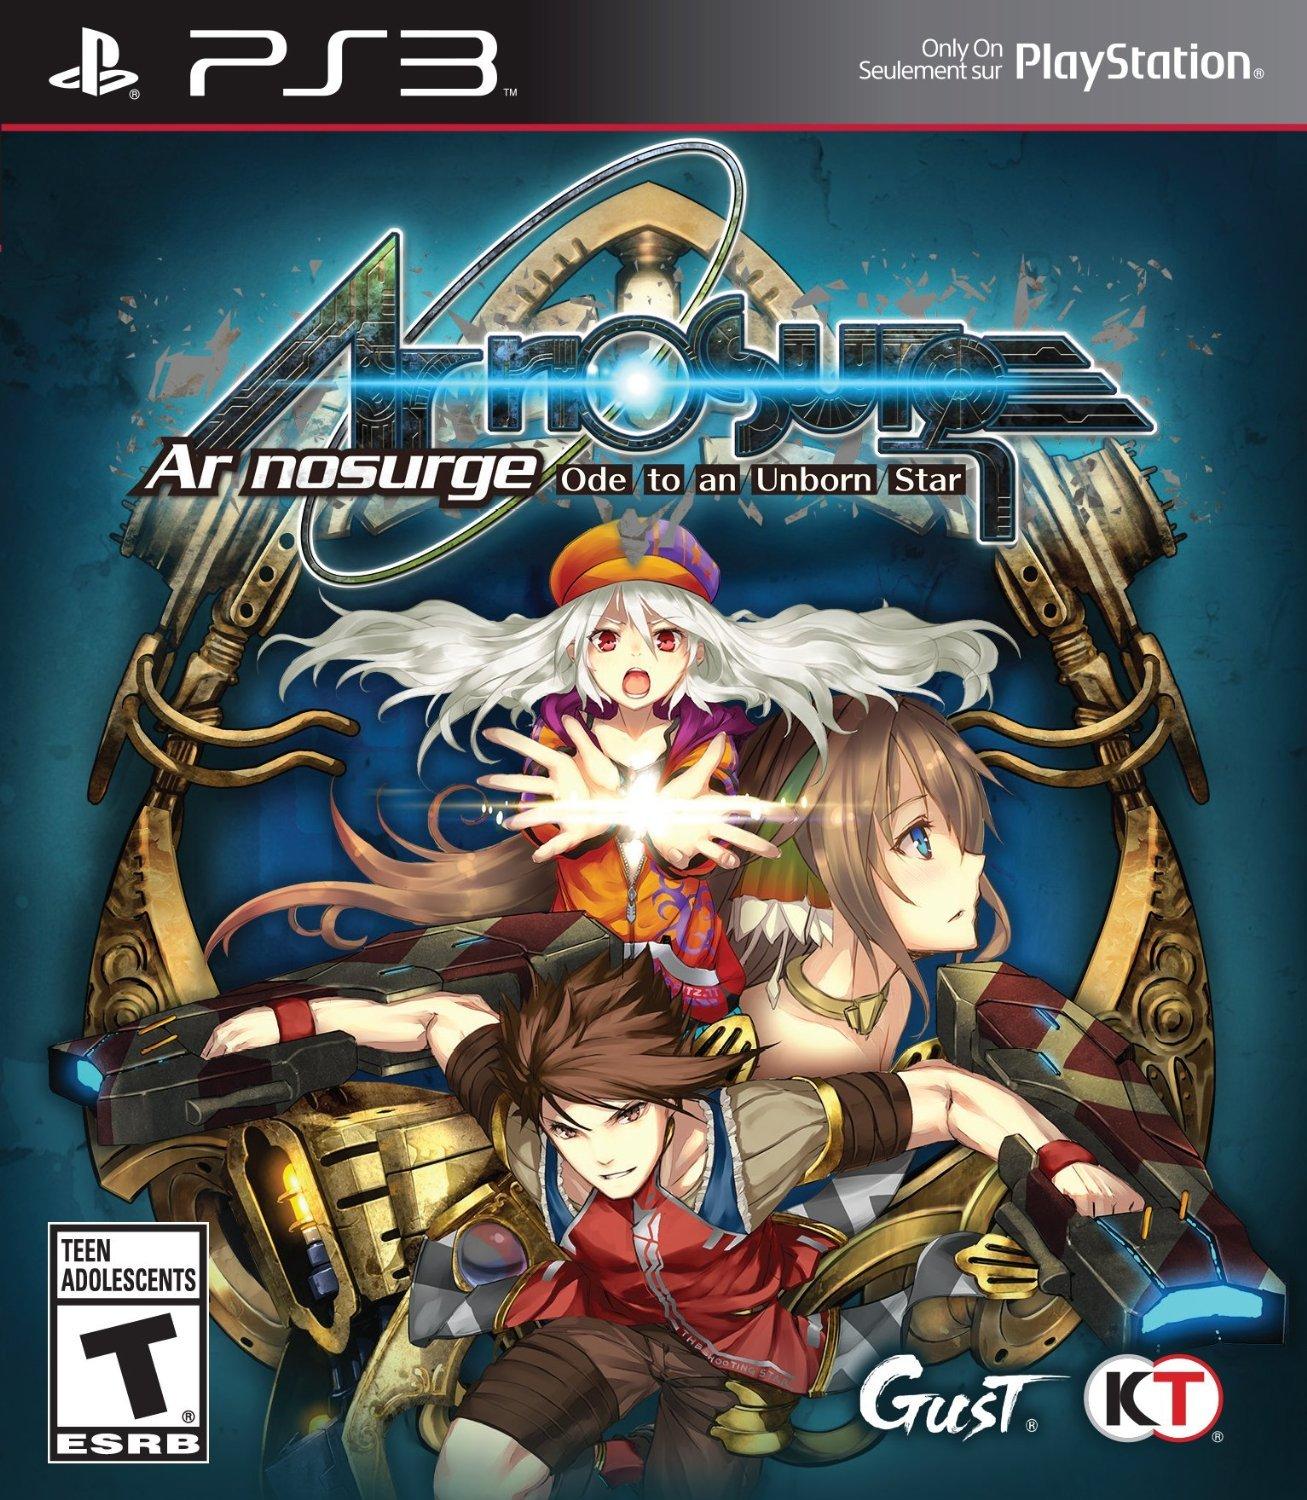 Ar nosurge: Ode to an Unborn Star - PlayStation 3